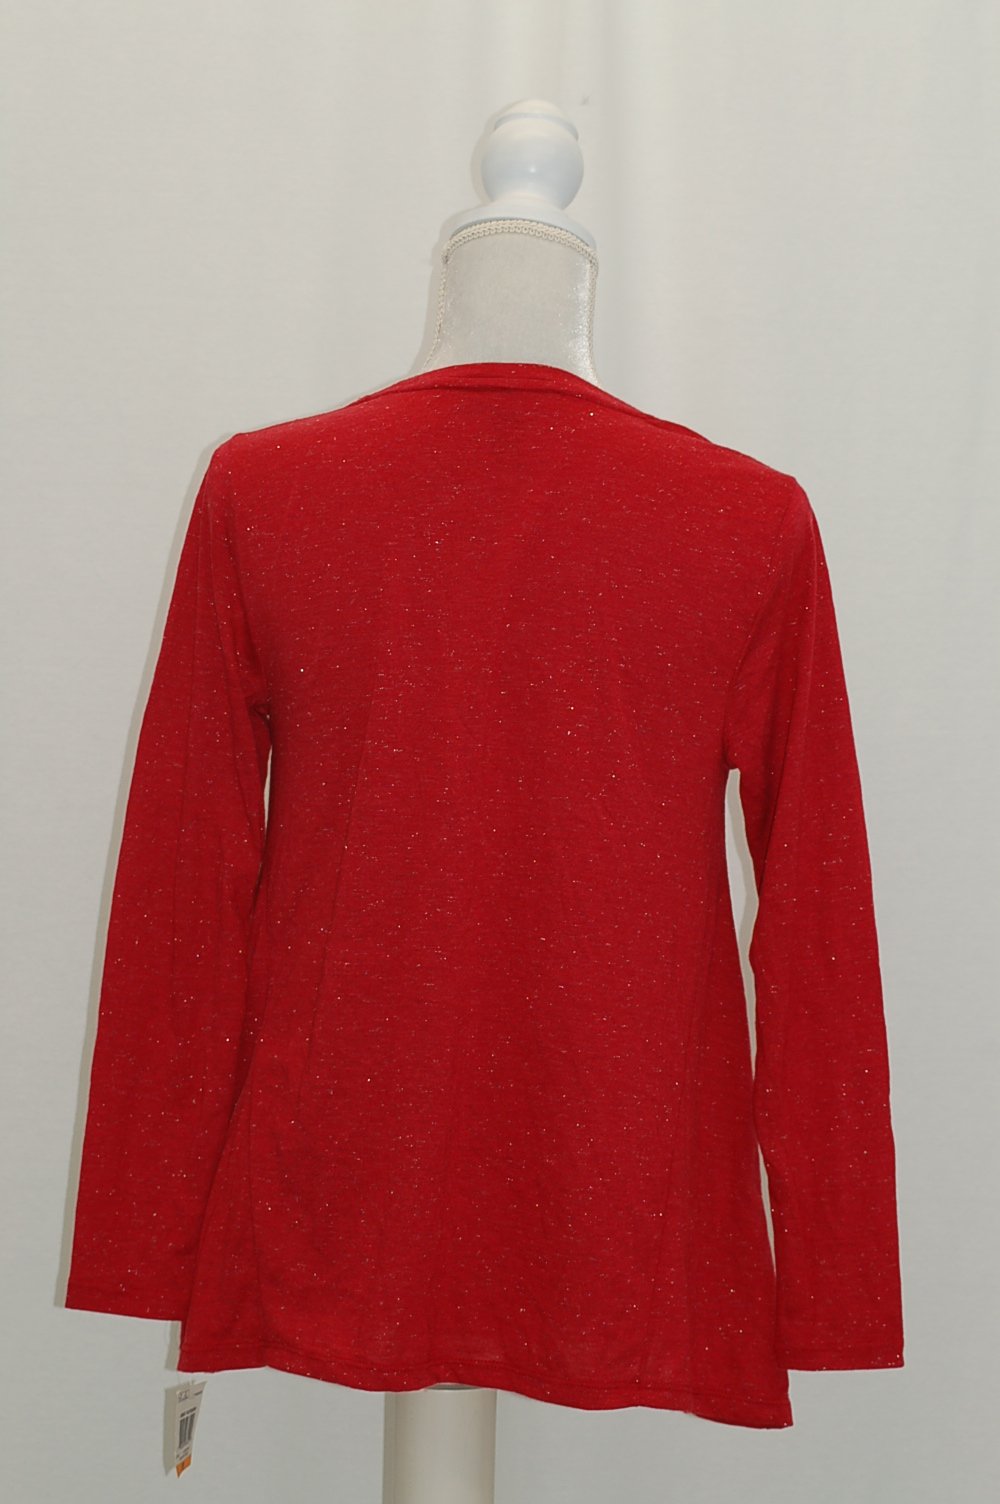 Style Co Petite Sparkle Swing Top New Red Amore PXS